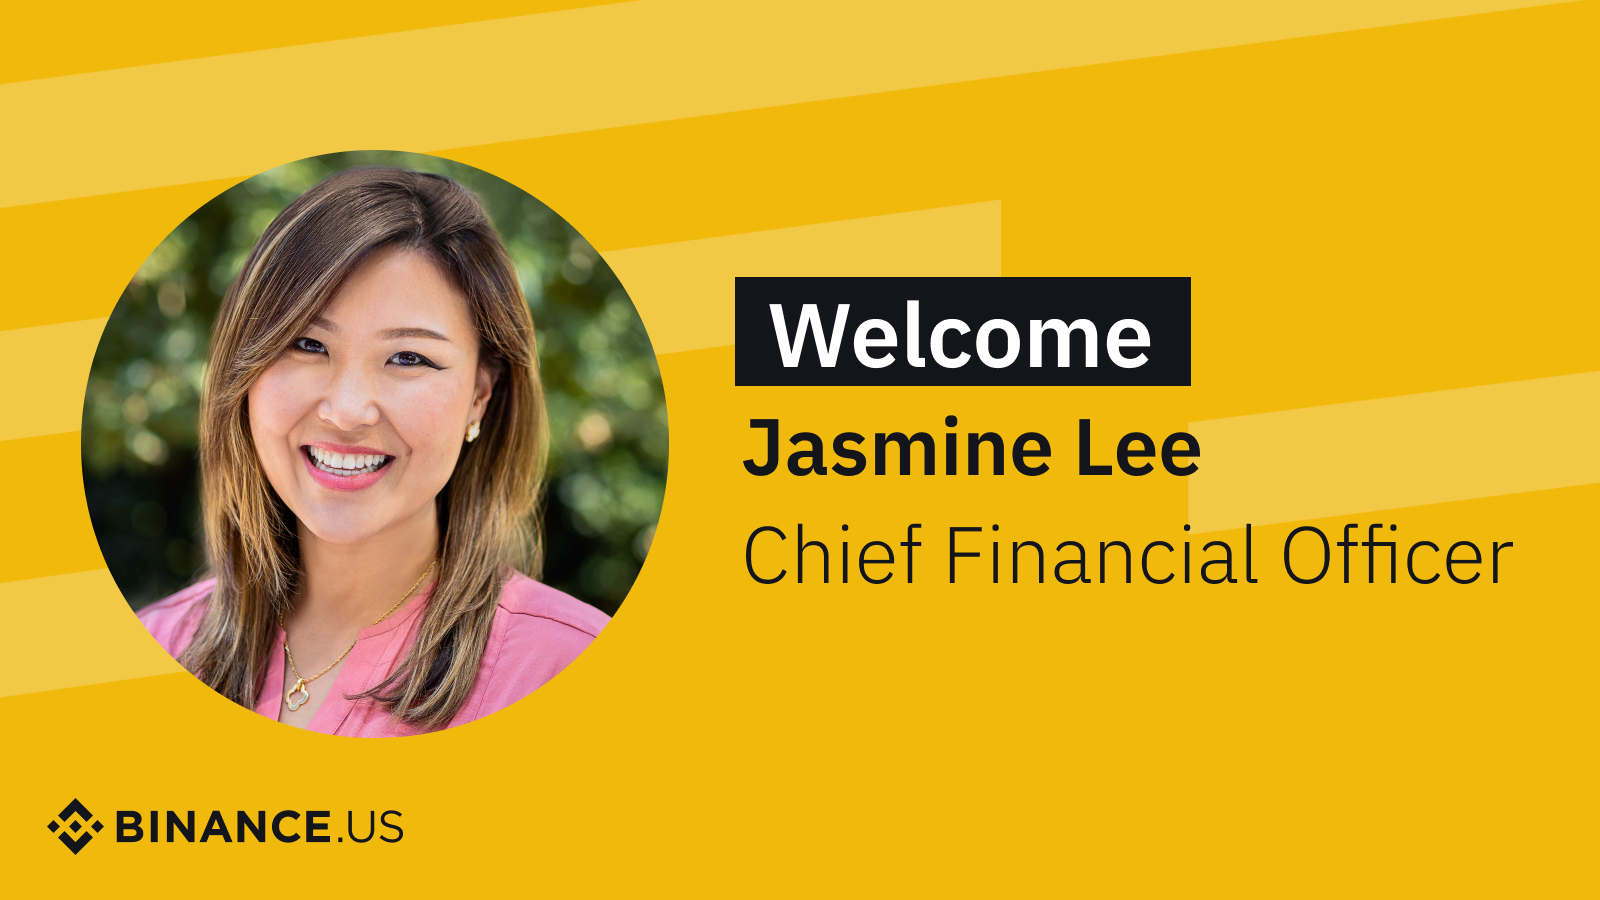 Jasmine Lee Joins Binance.US as Chief Financial Officer